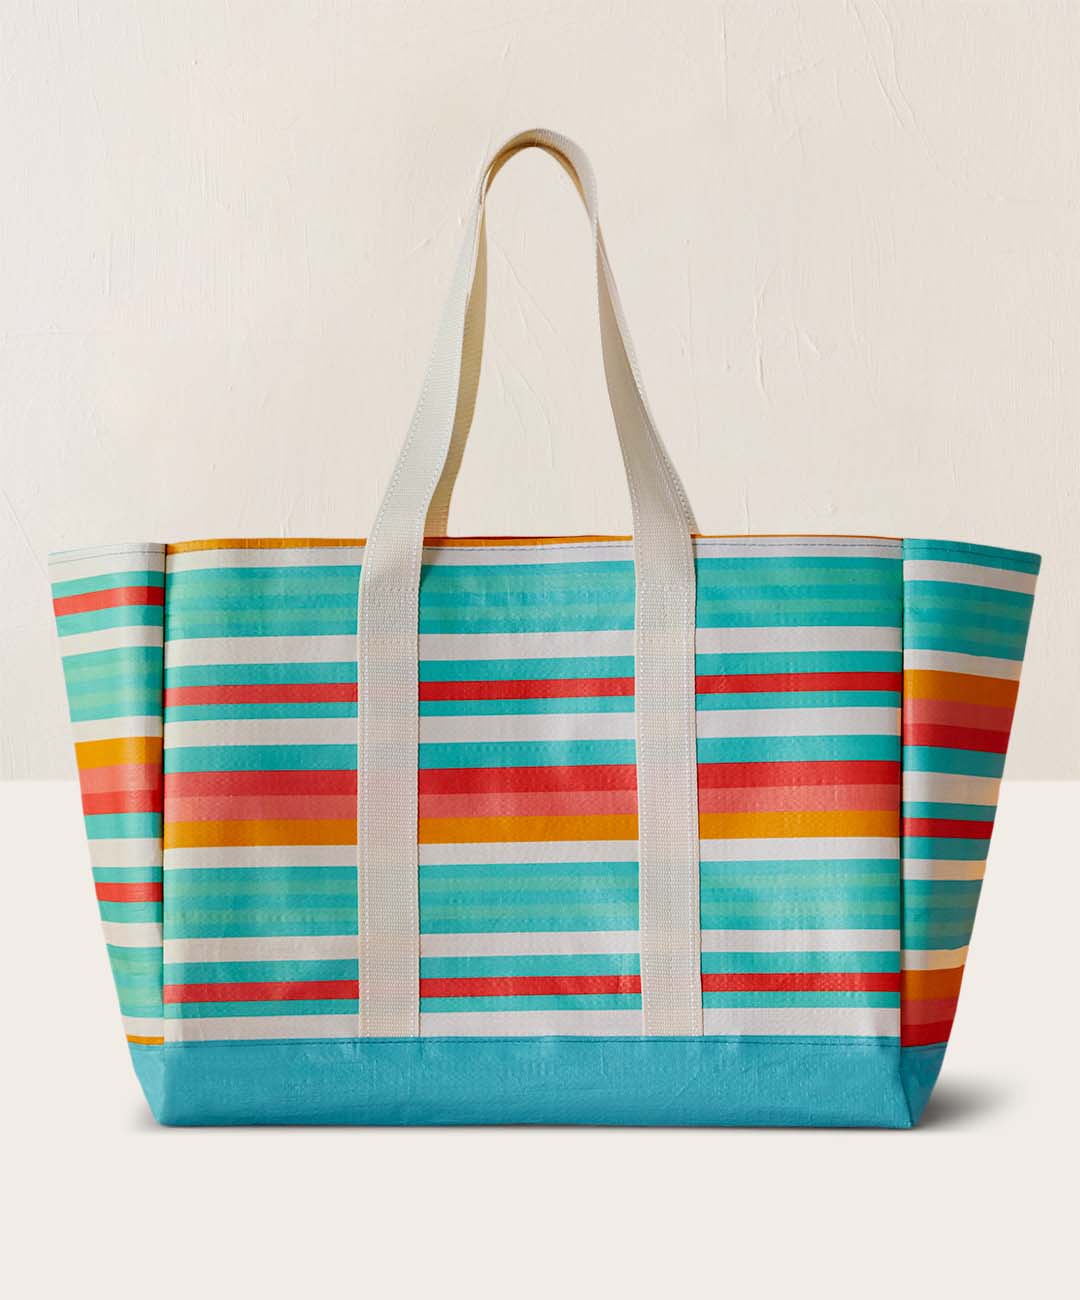 Eco-friendly fundraising ideas: Boon Supply Carryall Tote in Stripe ...